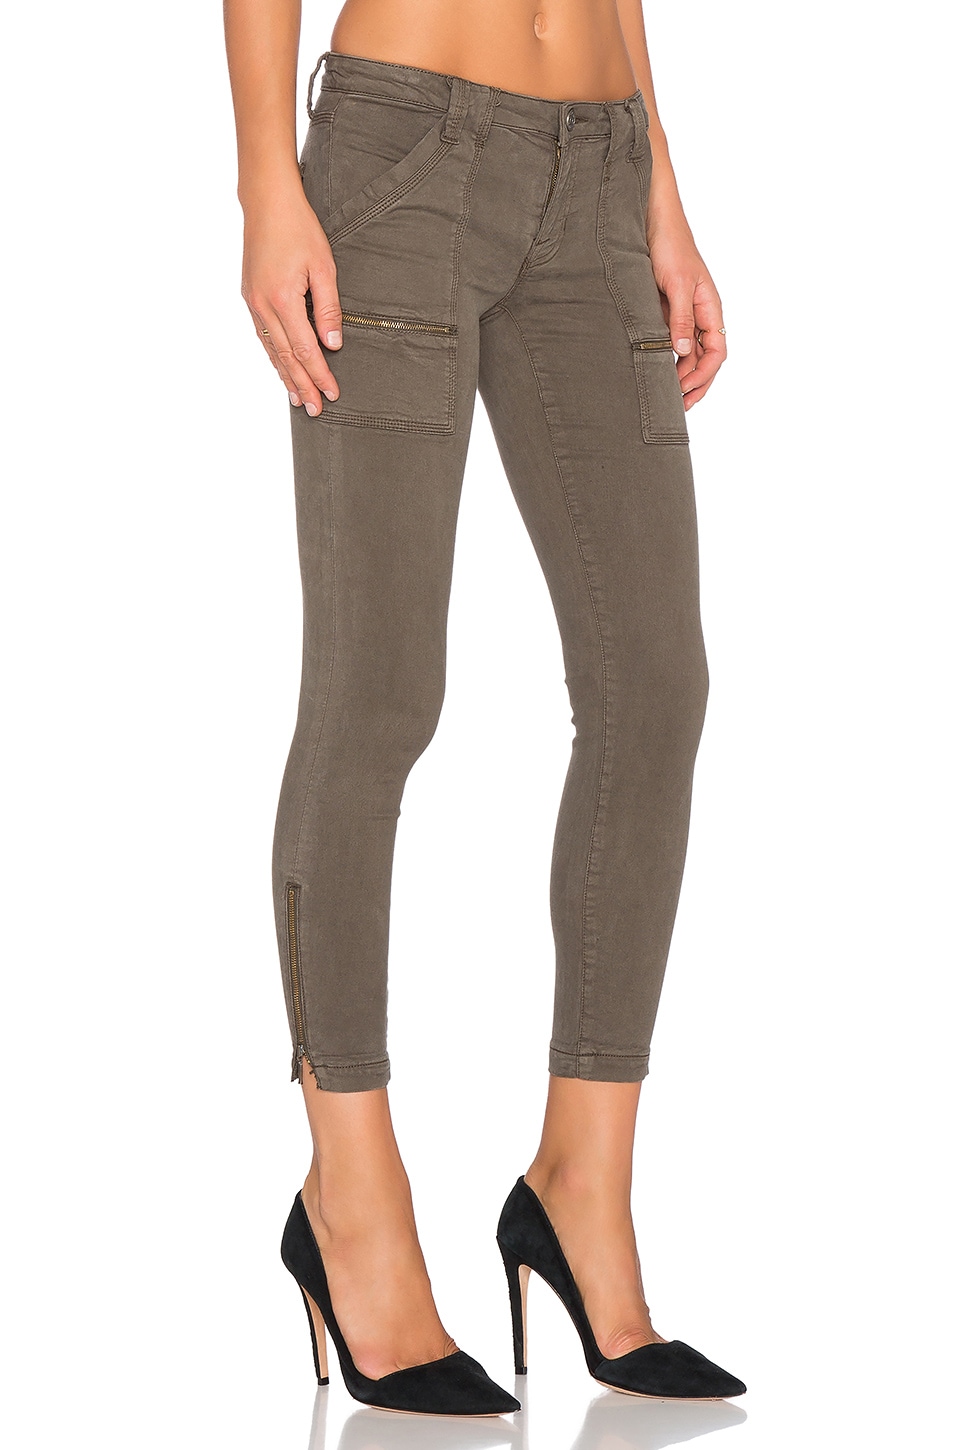 JOIE Park Twill Skinny Jeans, Cypress in Fatigue | ModeSens